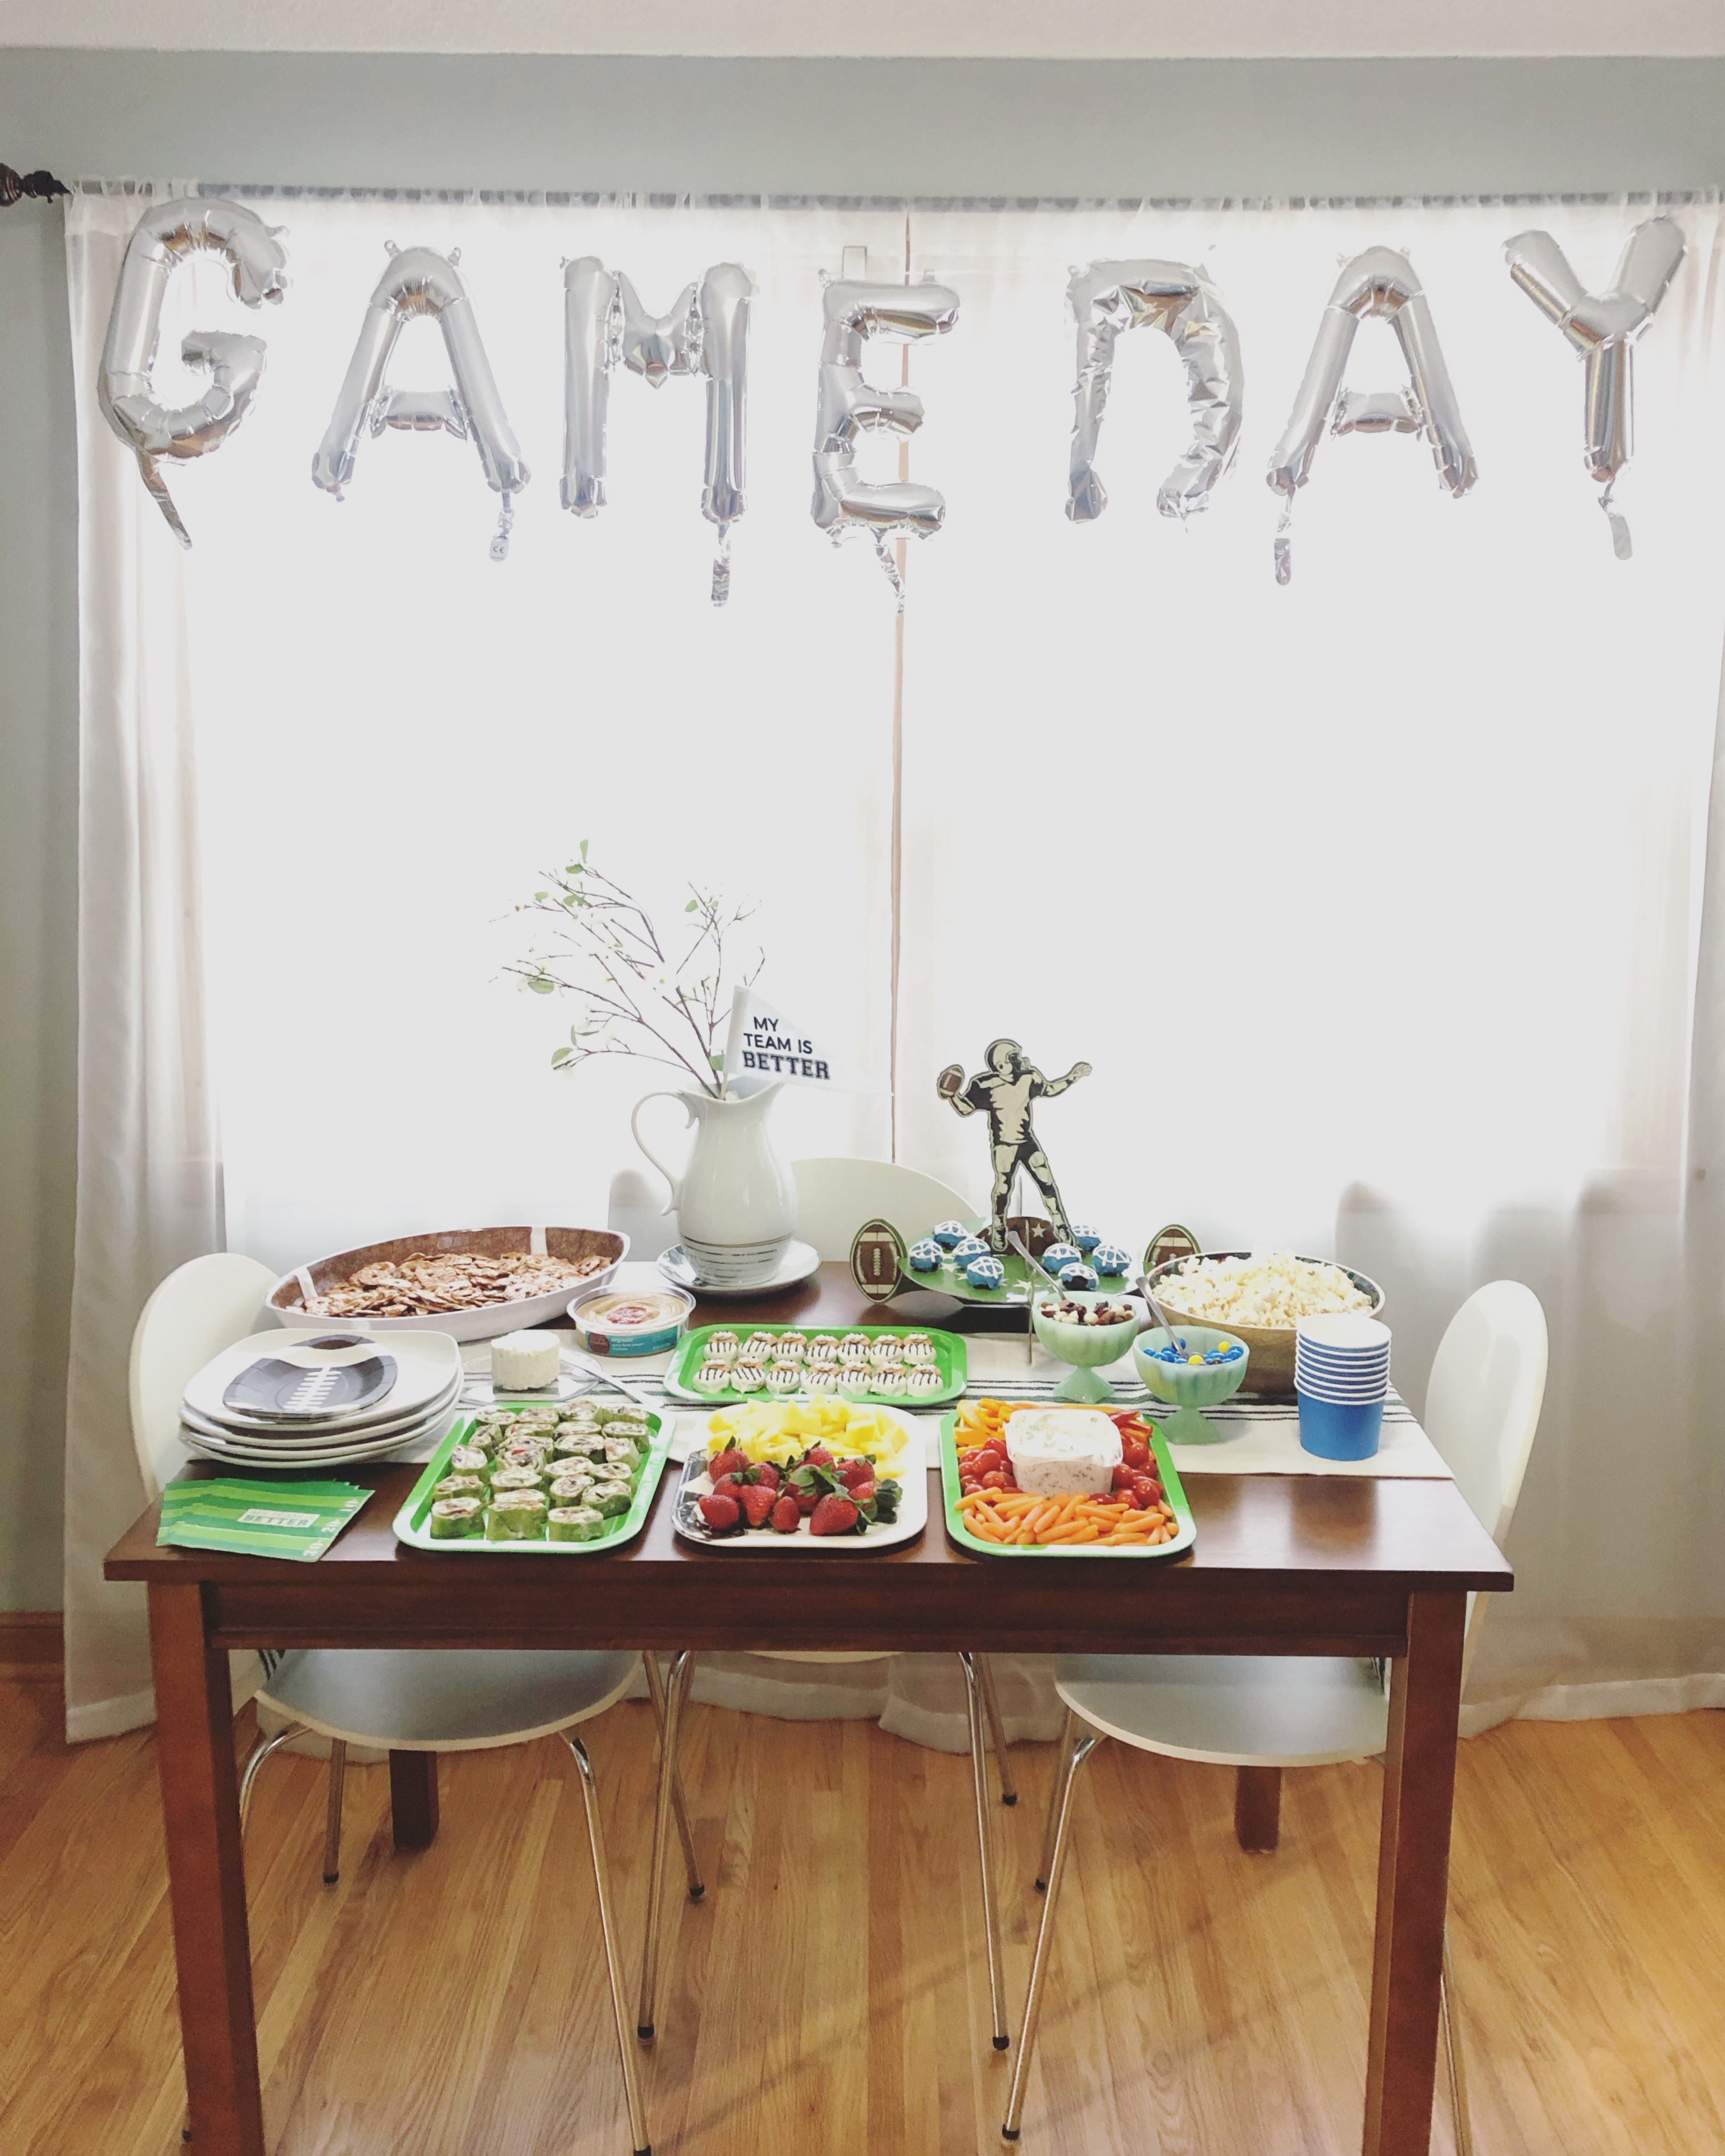 Football Themed Superbowl Party Inspo | Style & the Suburbs